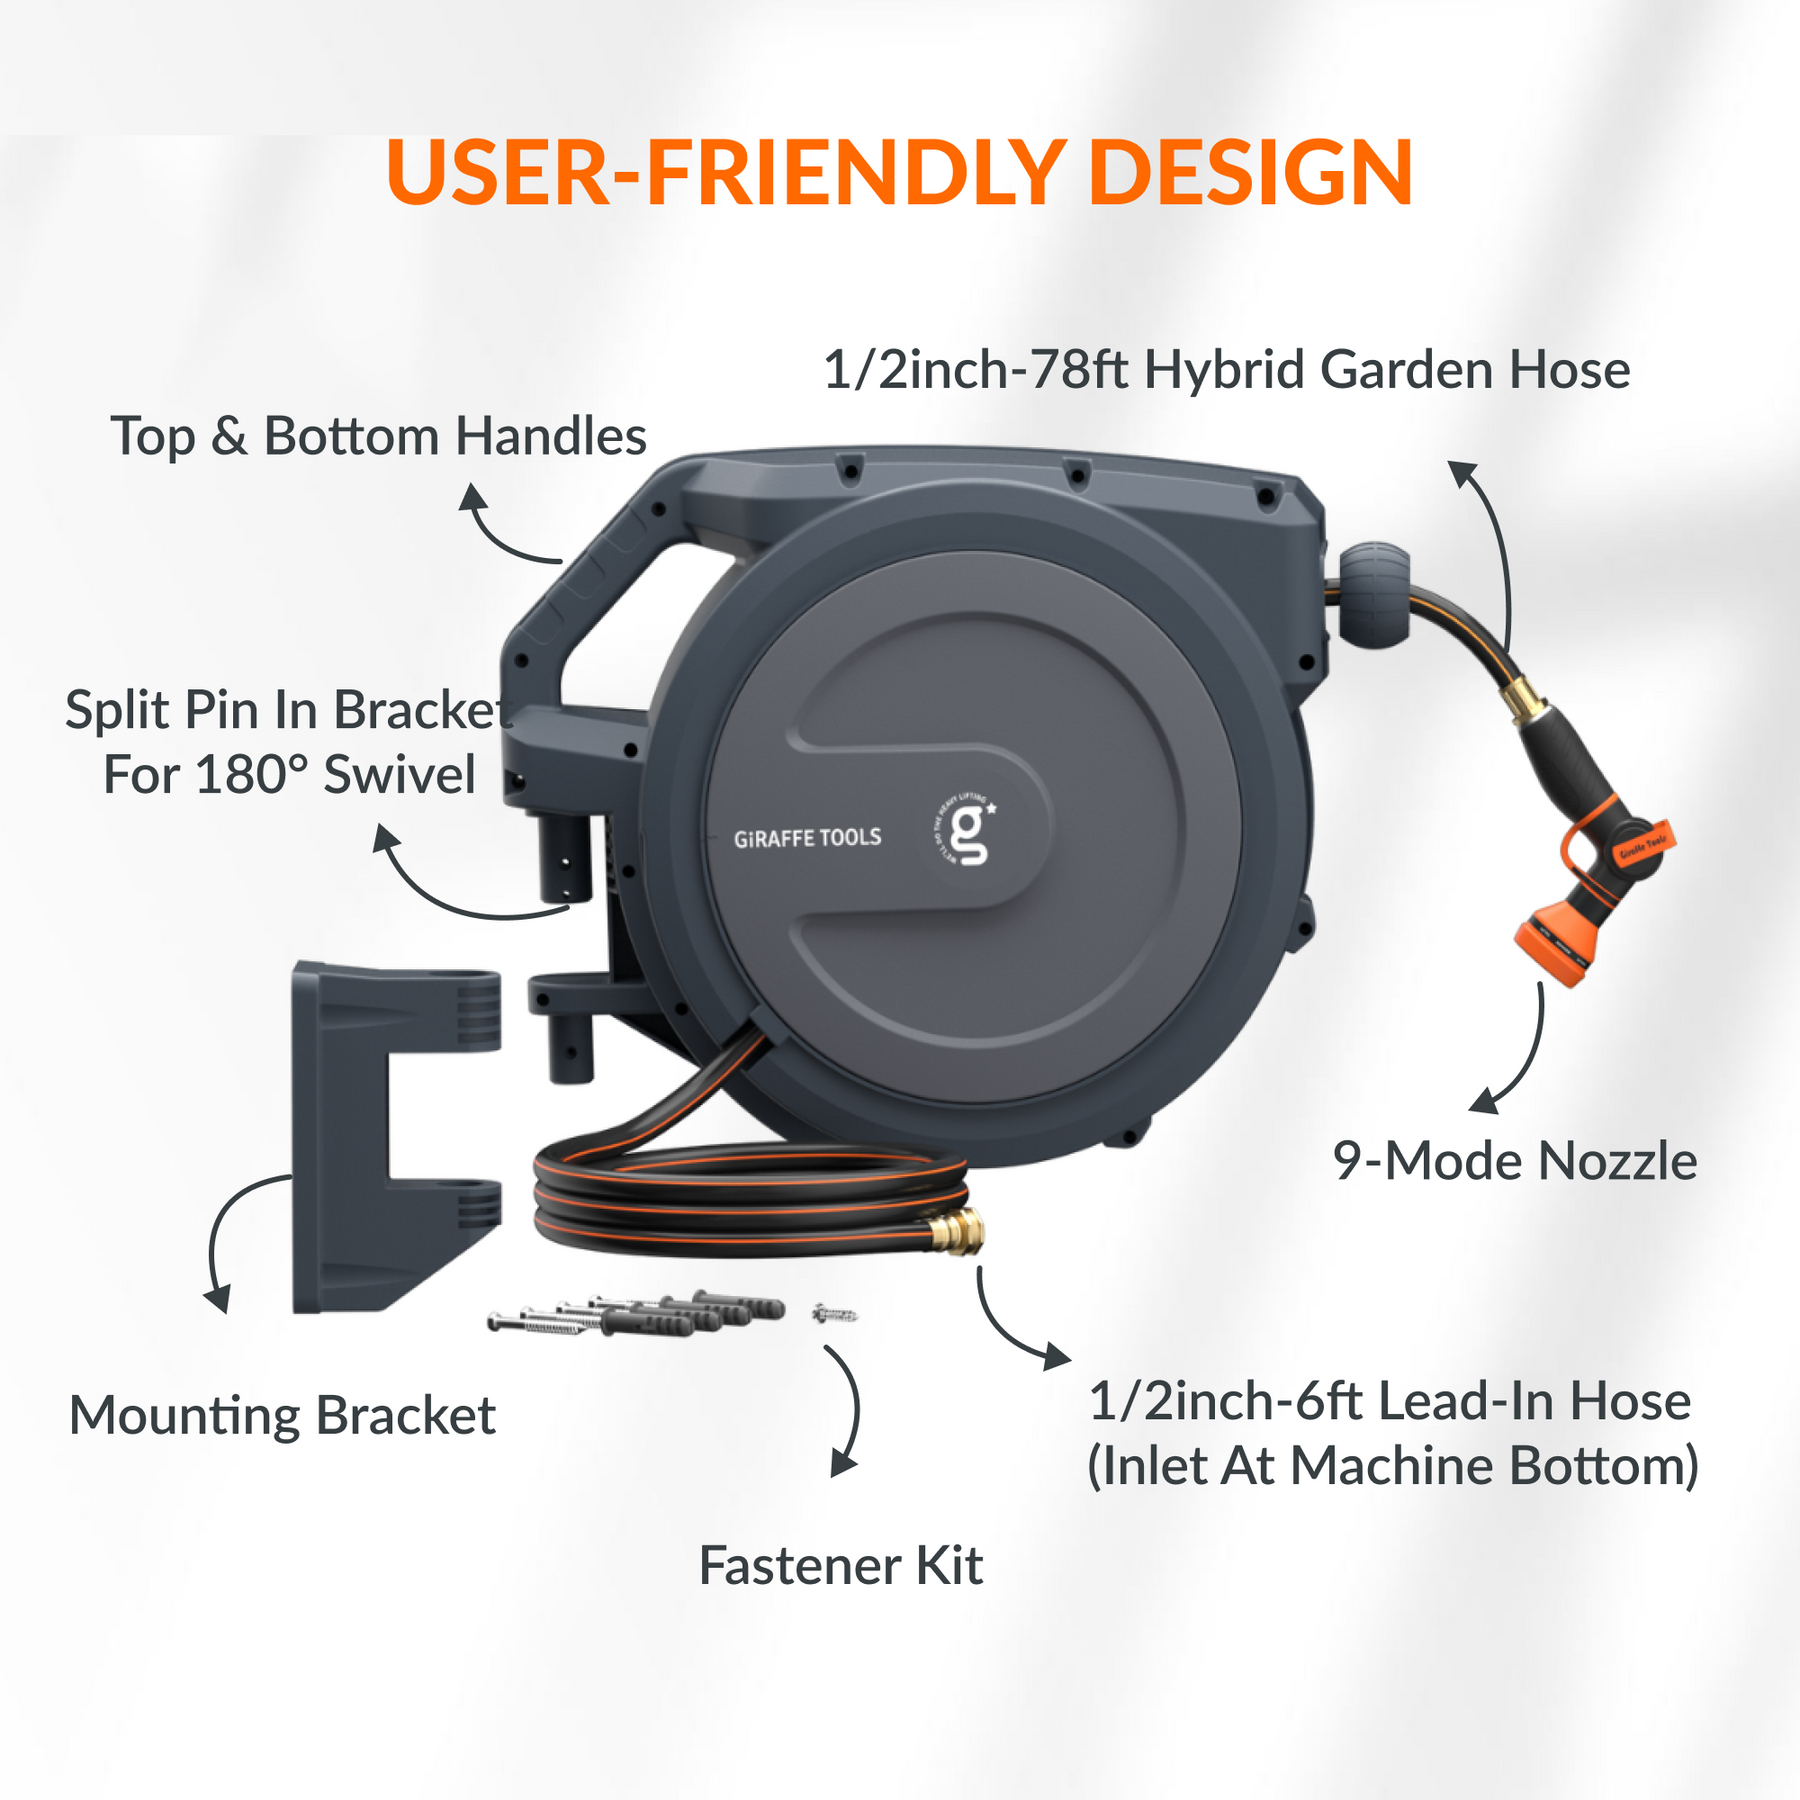 Giraffe Tools Wall Mounted Hose Reel 20+2m, Hose Pipe Reel Automatic Rewind  with 7 in 1 Spray Gun and Swivel Bracket for Garden